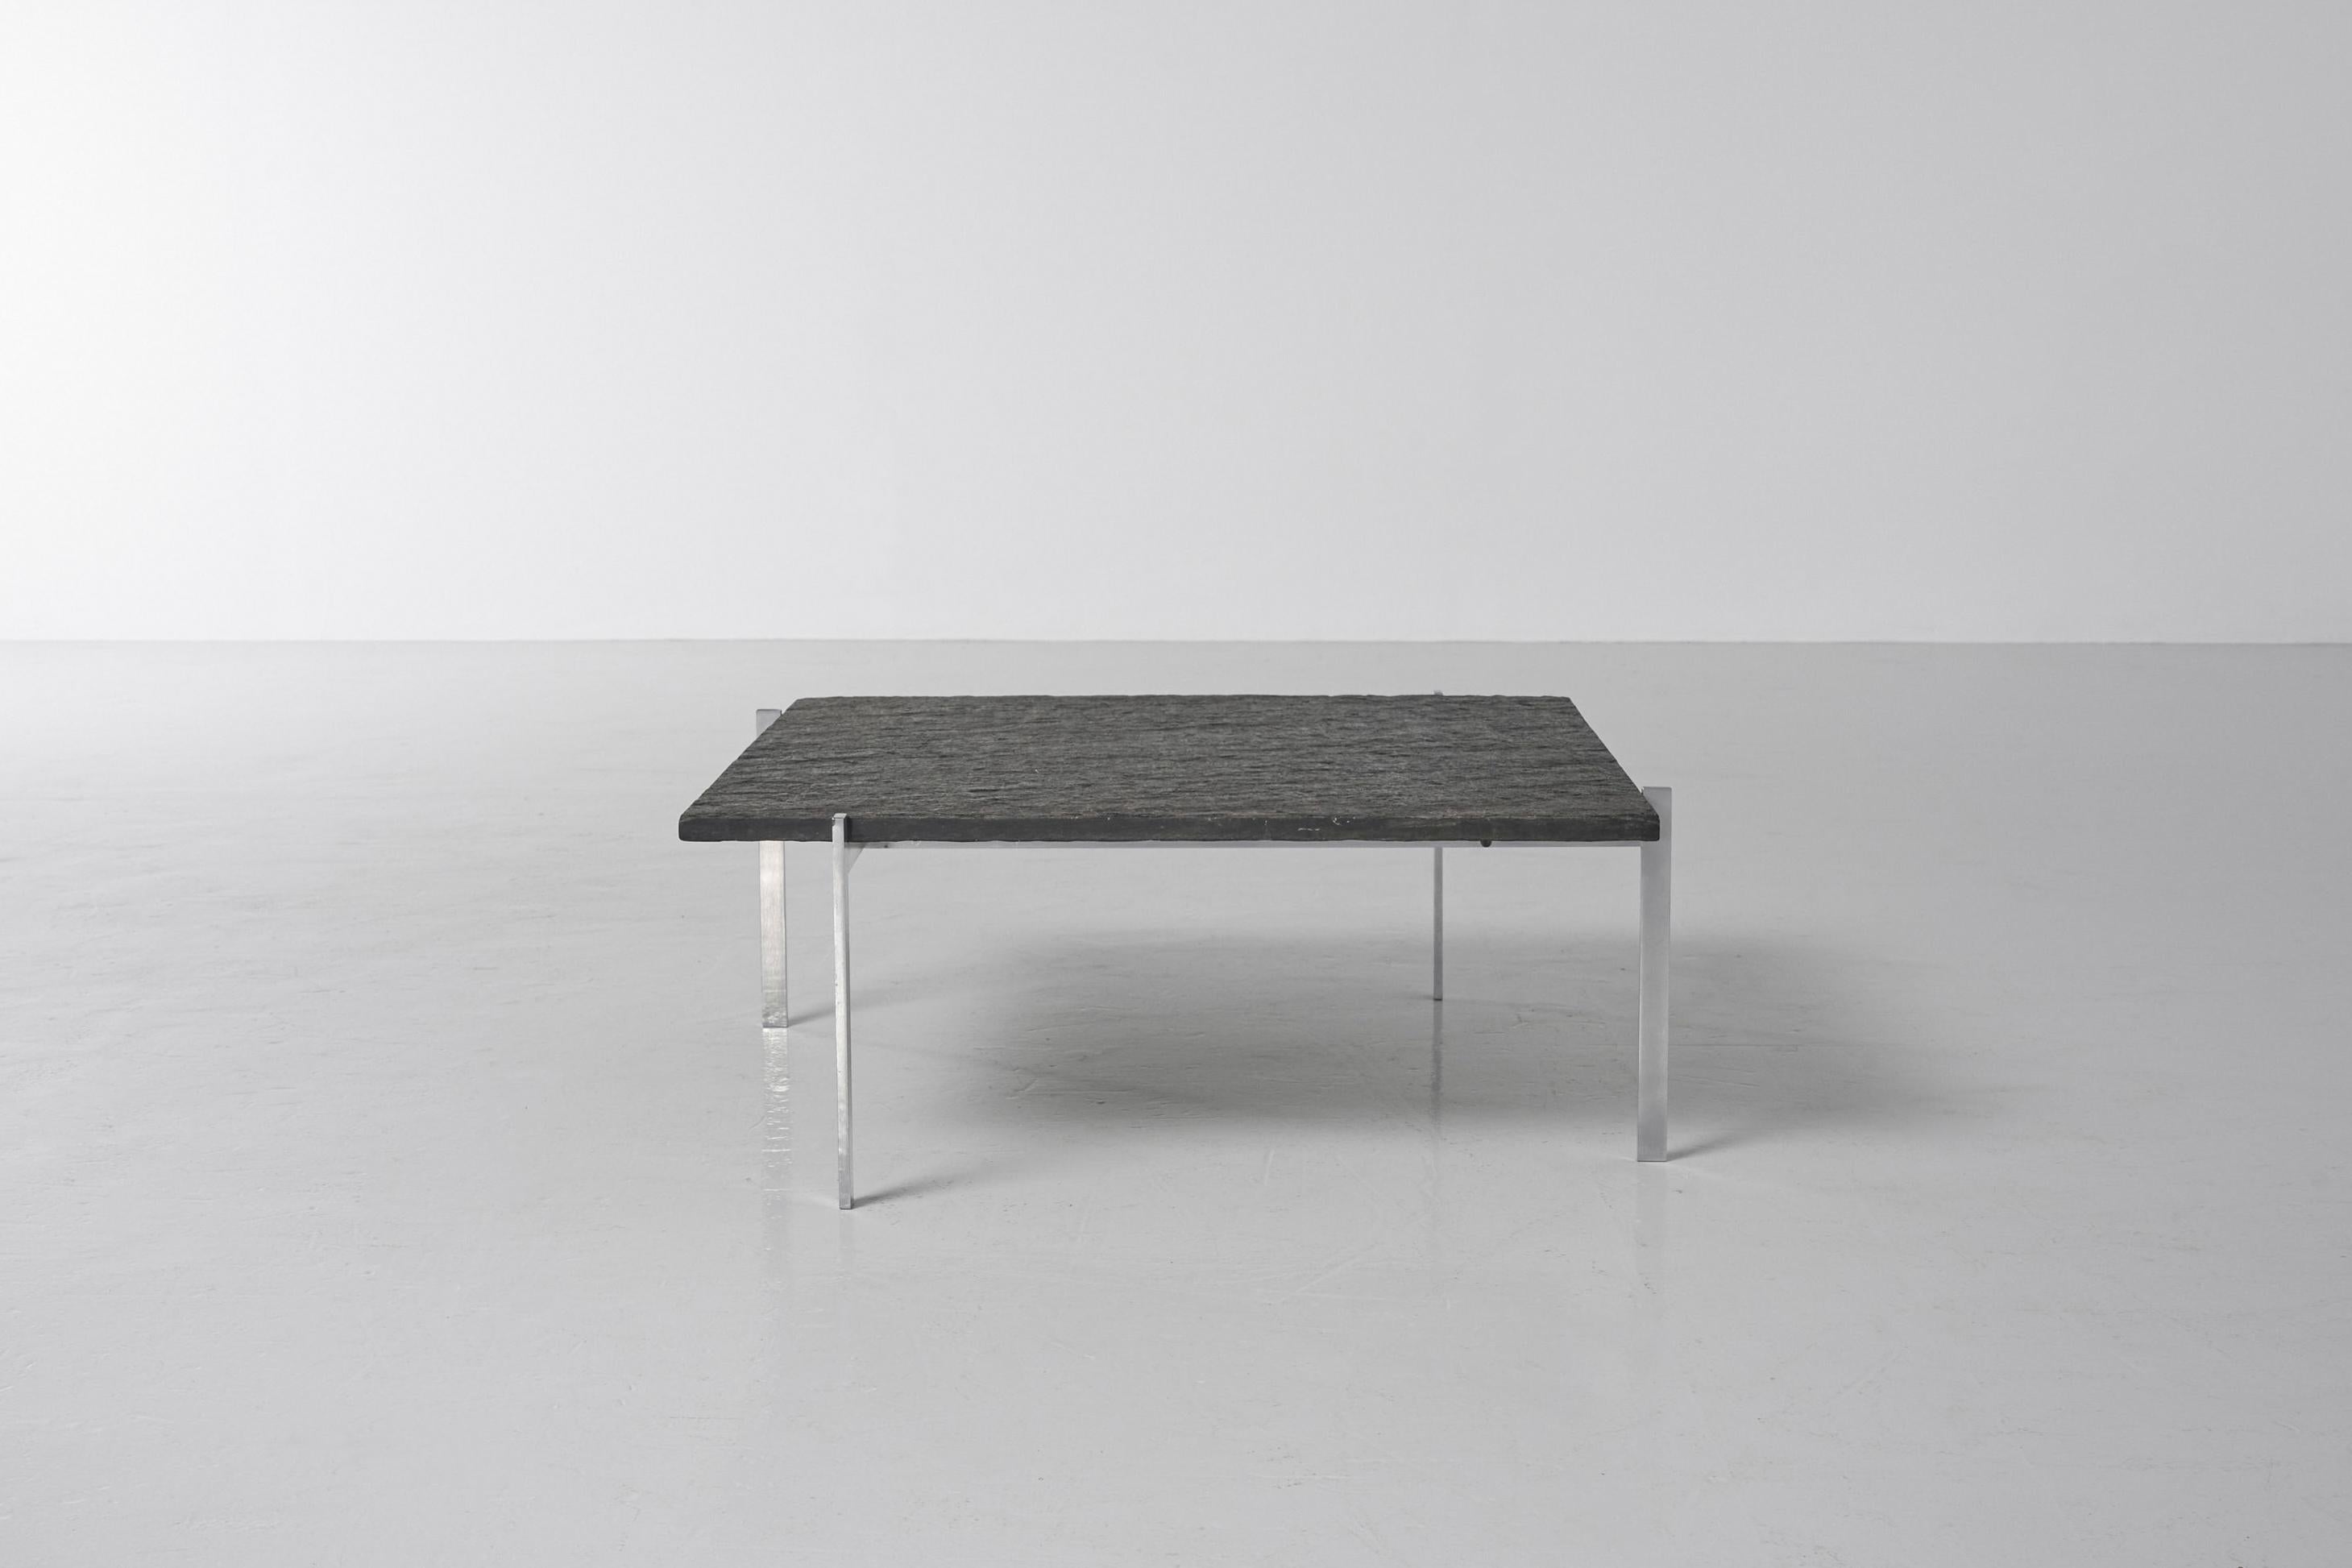 An iconic and one of the most well-known designs by furniture architect Poul Kjaerholm, is this model PK61 coffee table which was manufactured by Ejvind Kold Christensen in Denmark, 1956. The minimalistic matt chrome plated steel frame supports the